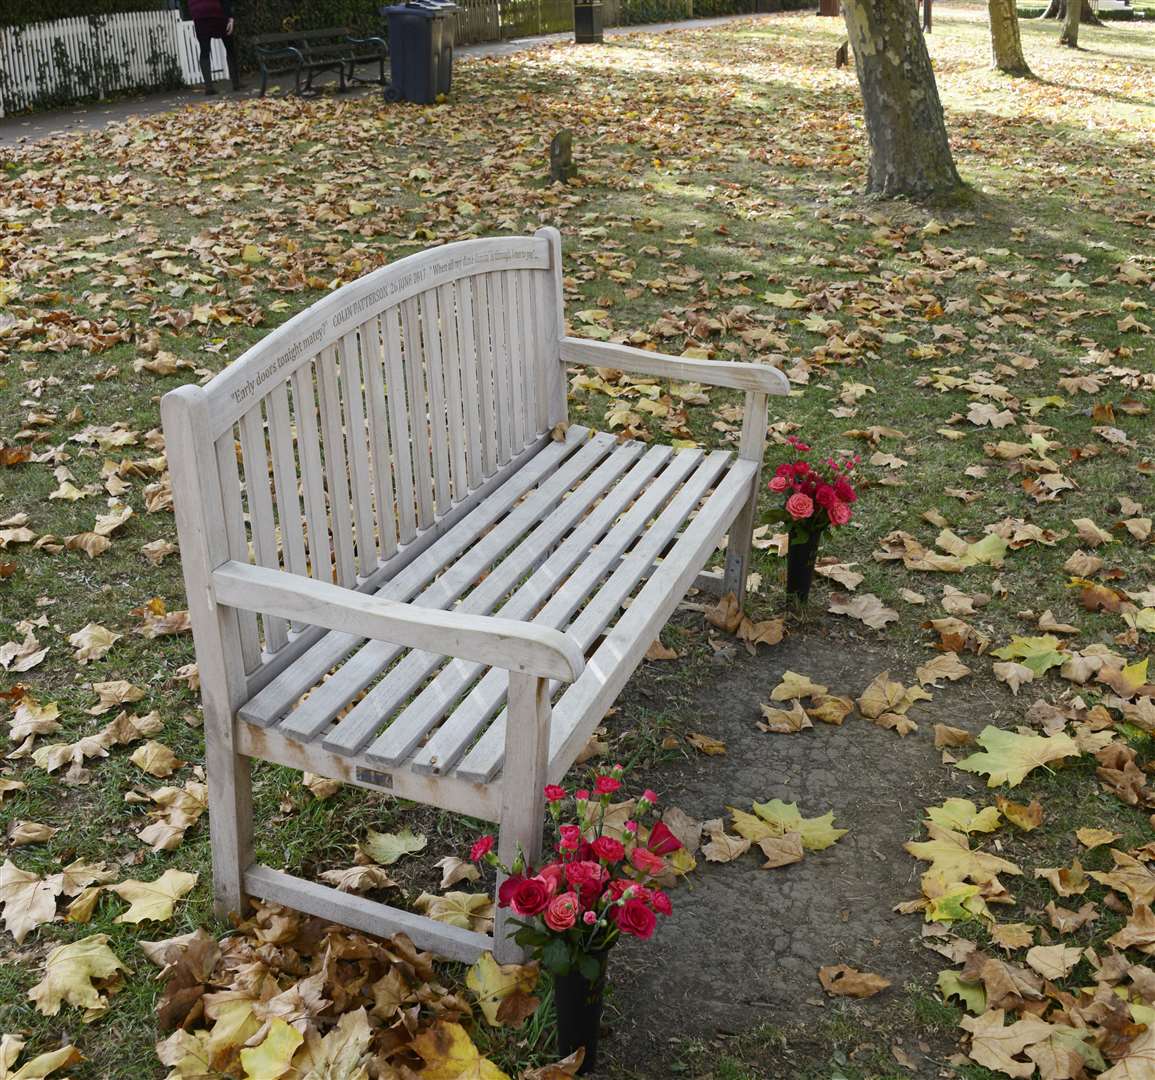 Benches in Tenterden could become shared to keep up with demand. Archive picture